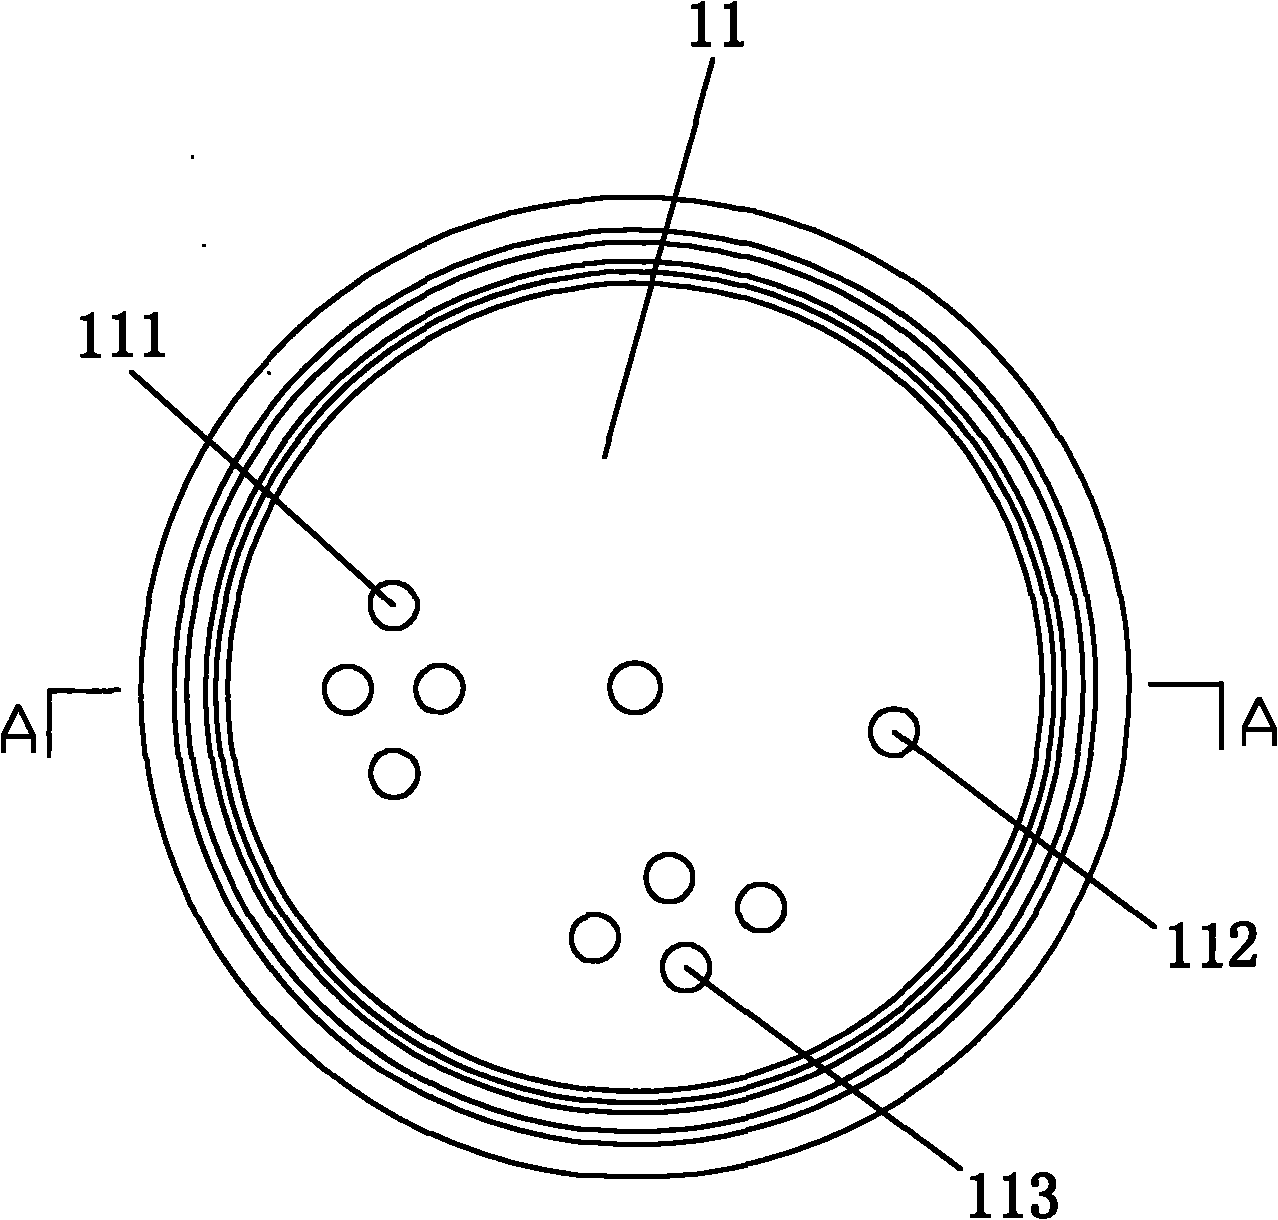 Improved structure of loose powder compact